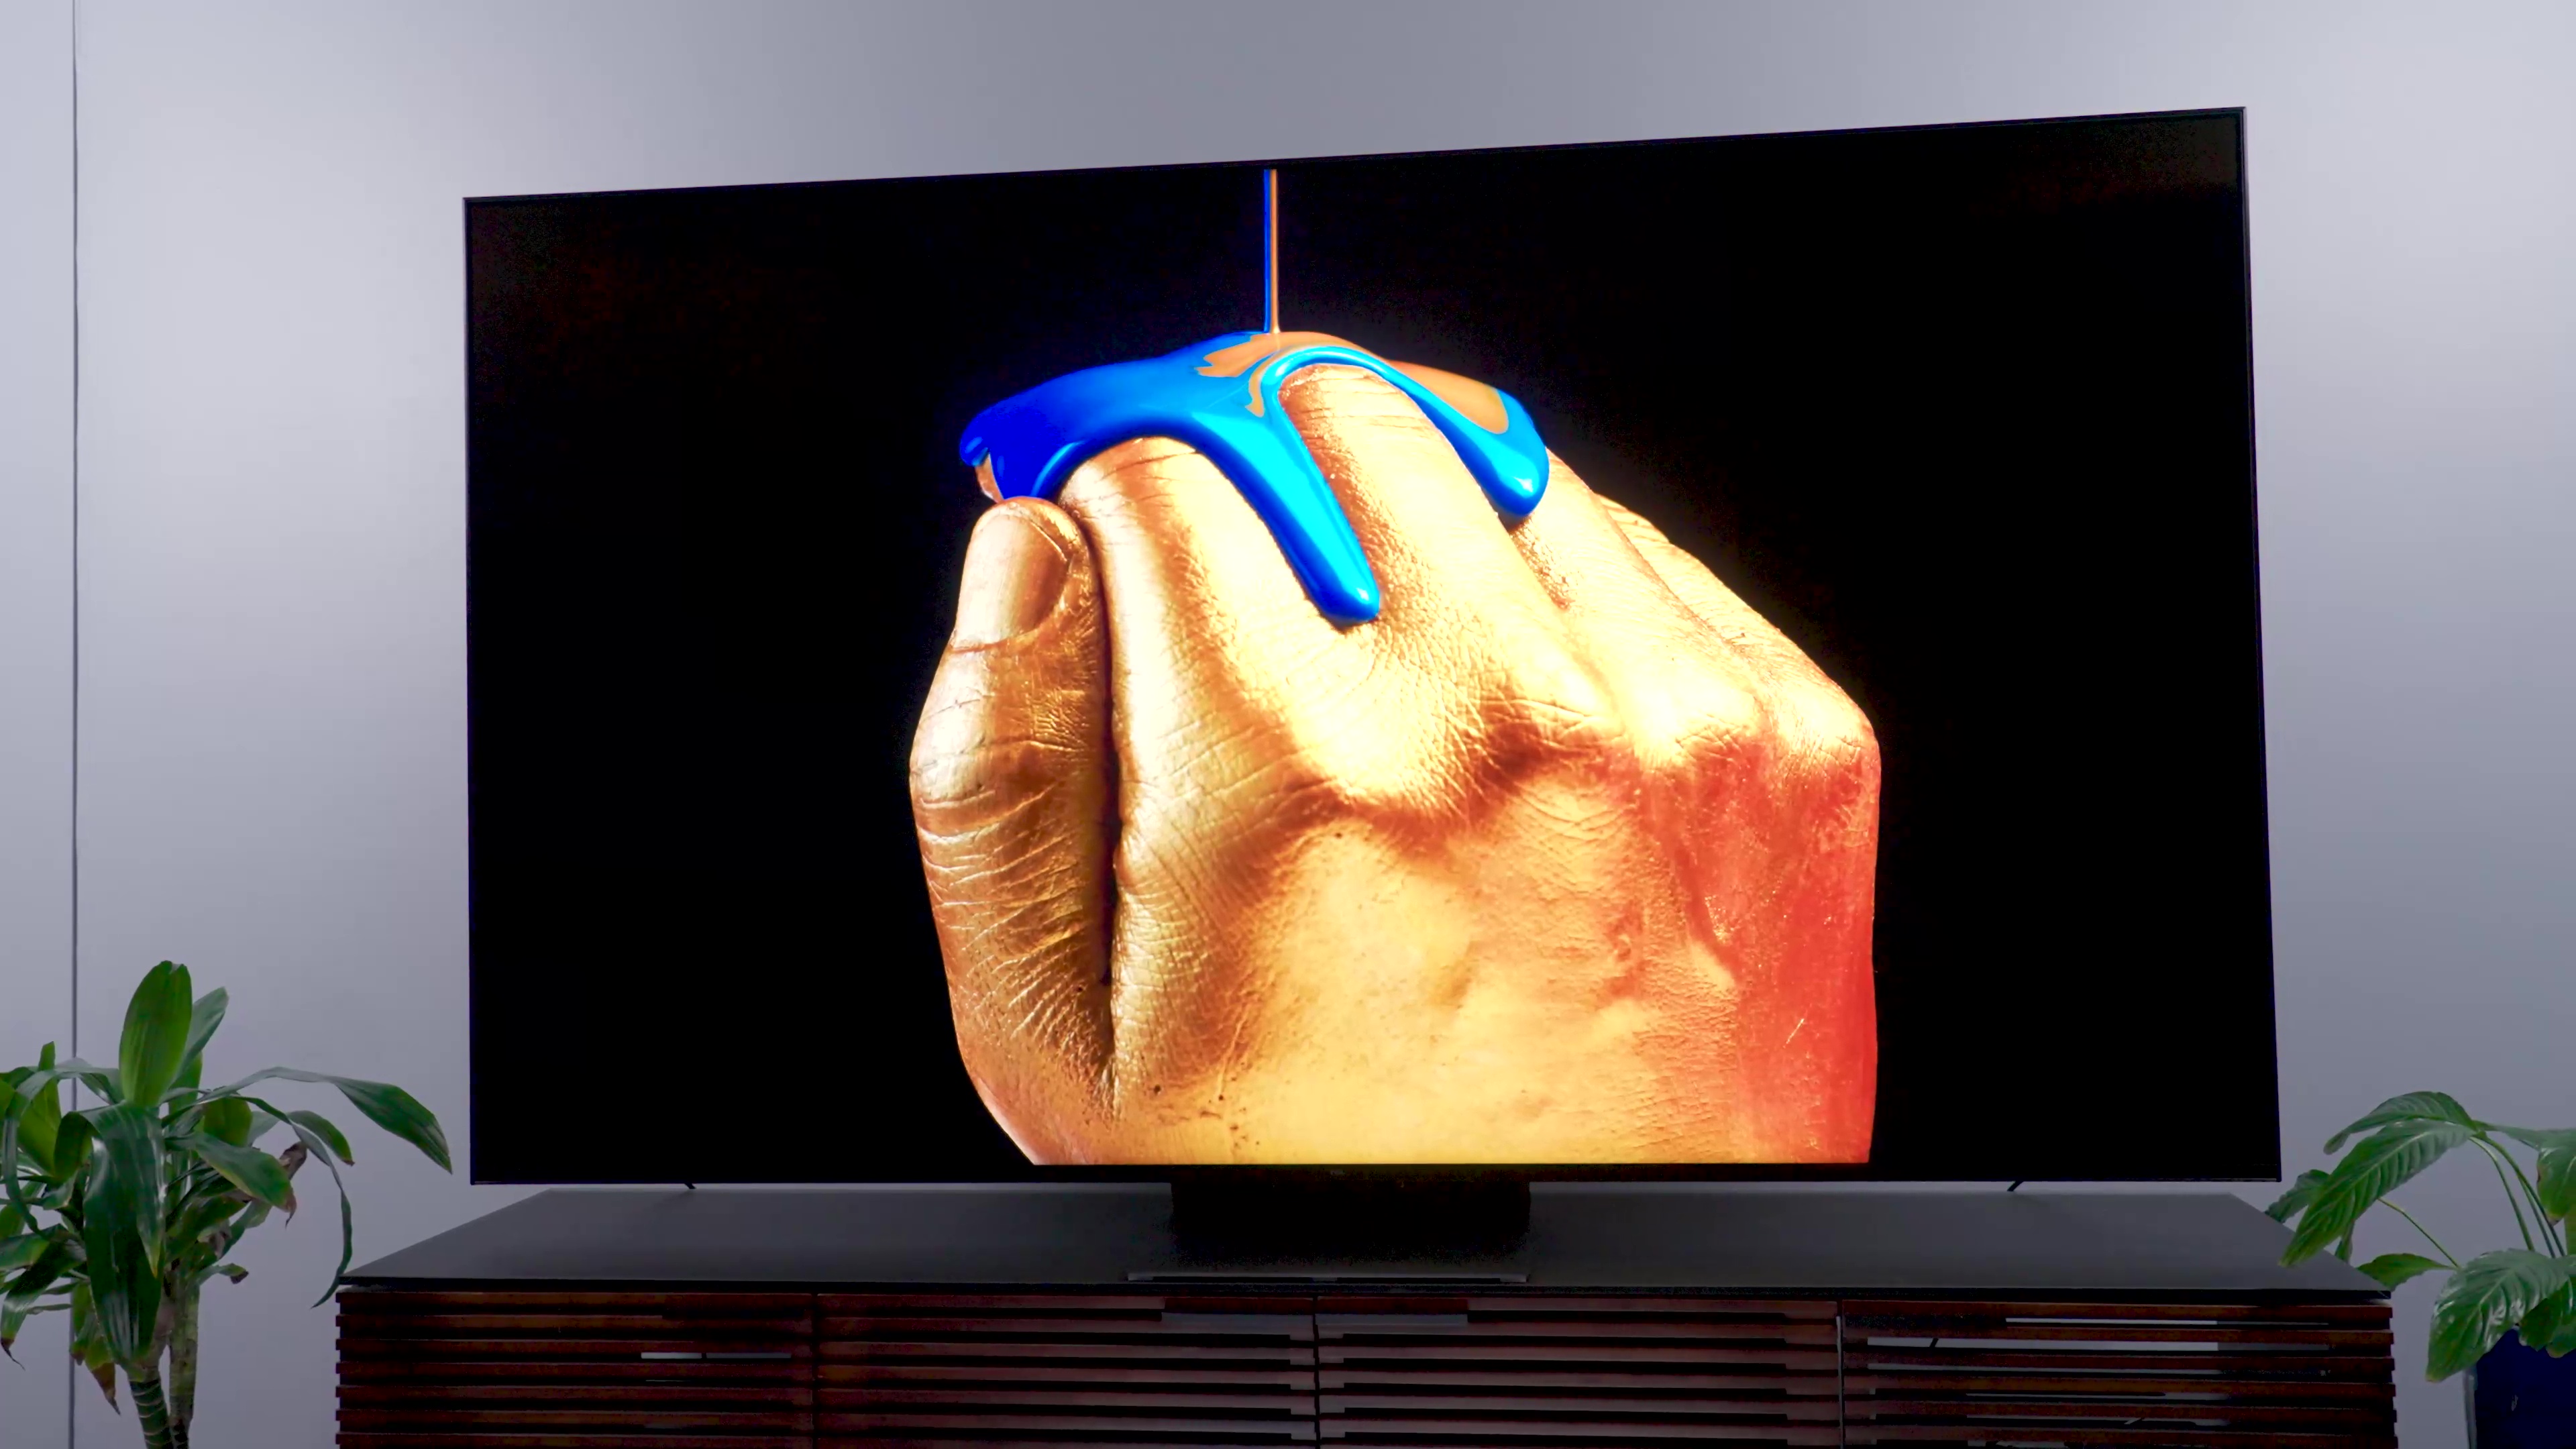 A stylized image of metallic blue paint being poured over hand shown on a a TCL QM8.